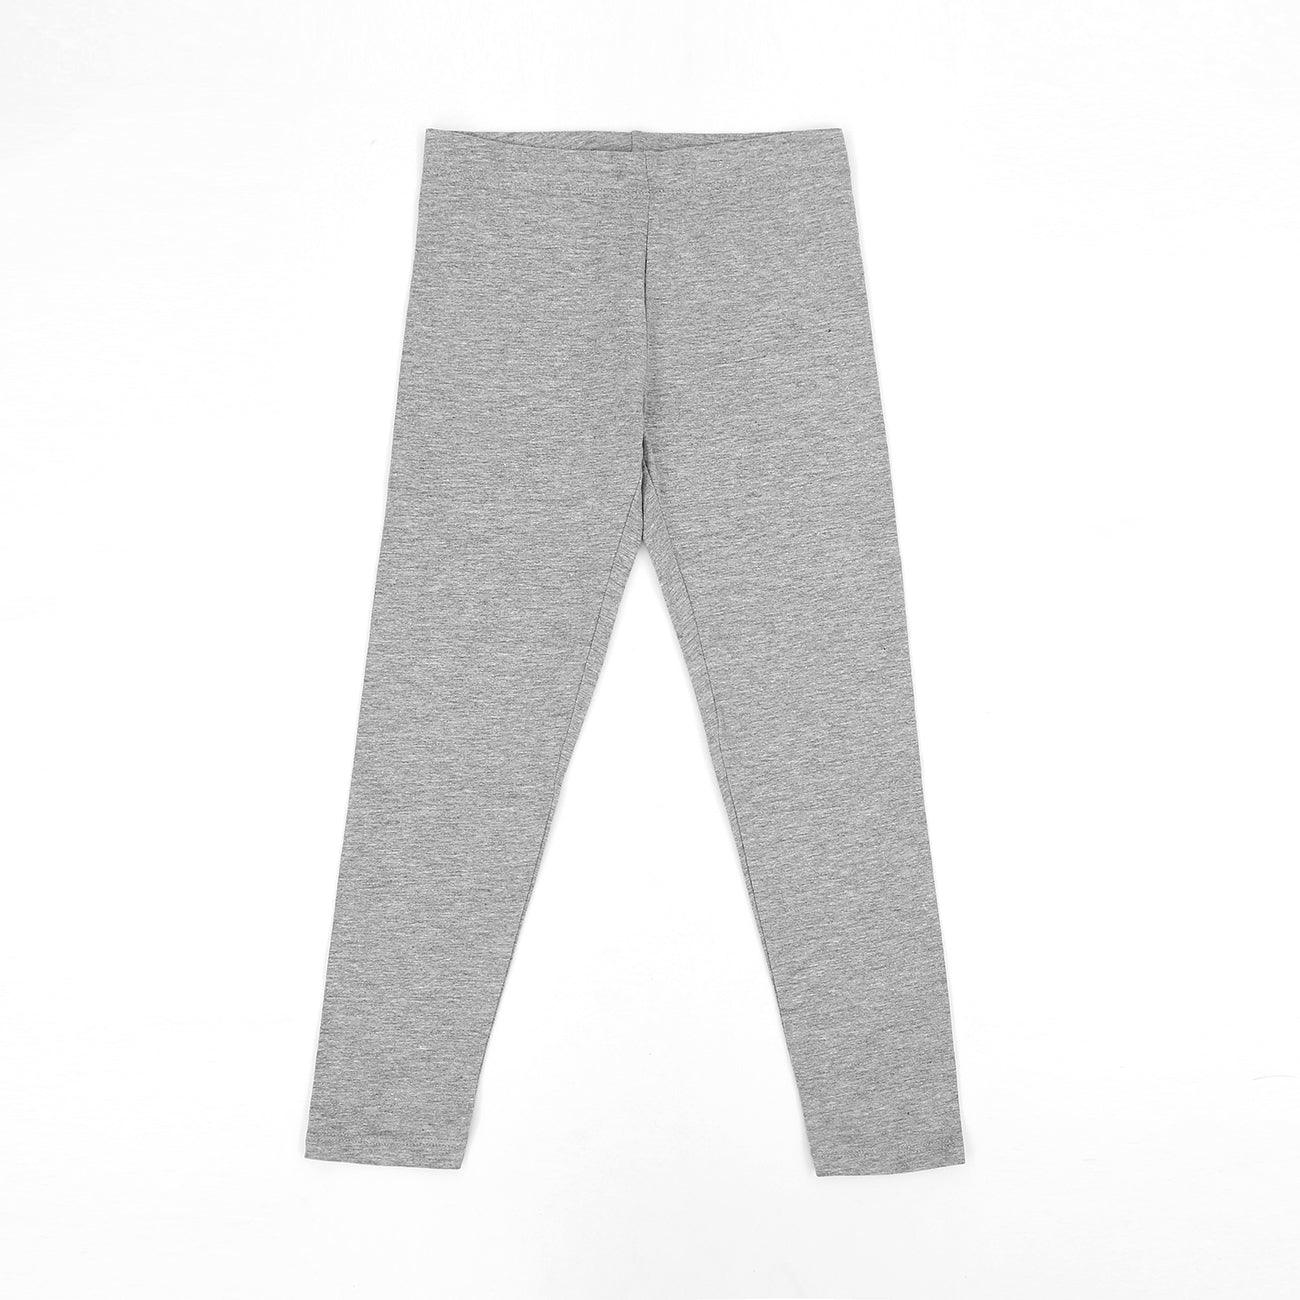 Imported Grey Soft Cotton Legging For Girls 5 YRS - 11-12 YRS (LE-11574) - Brands River